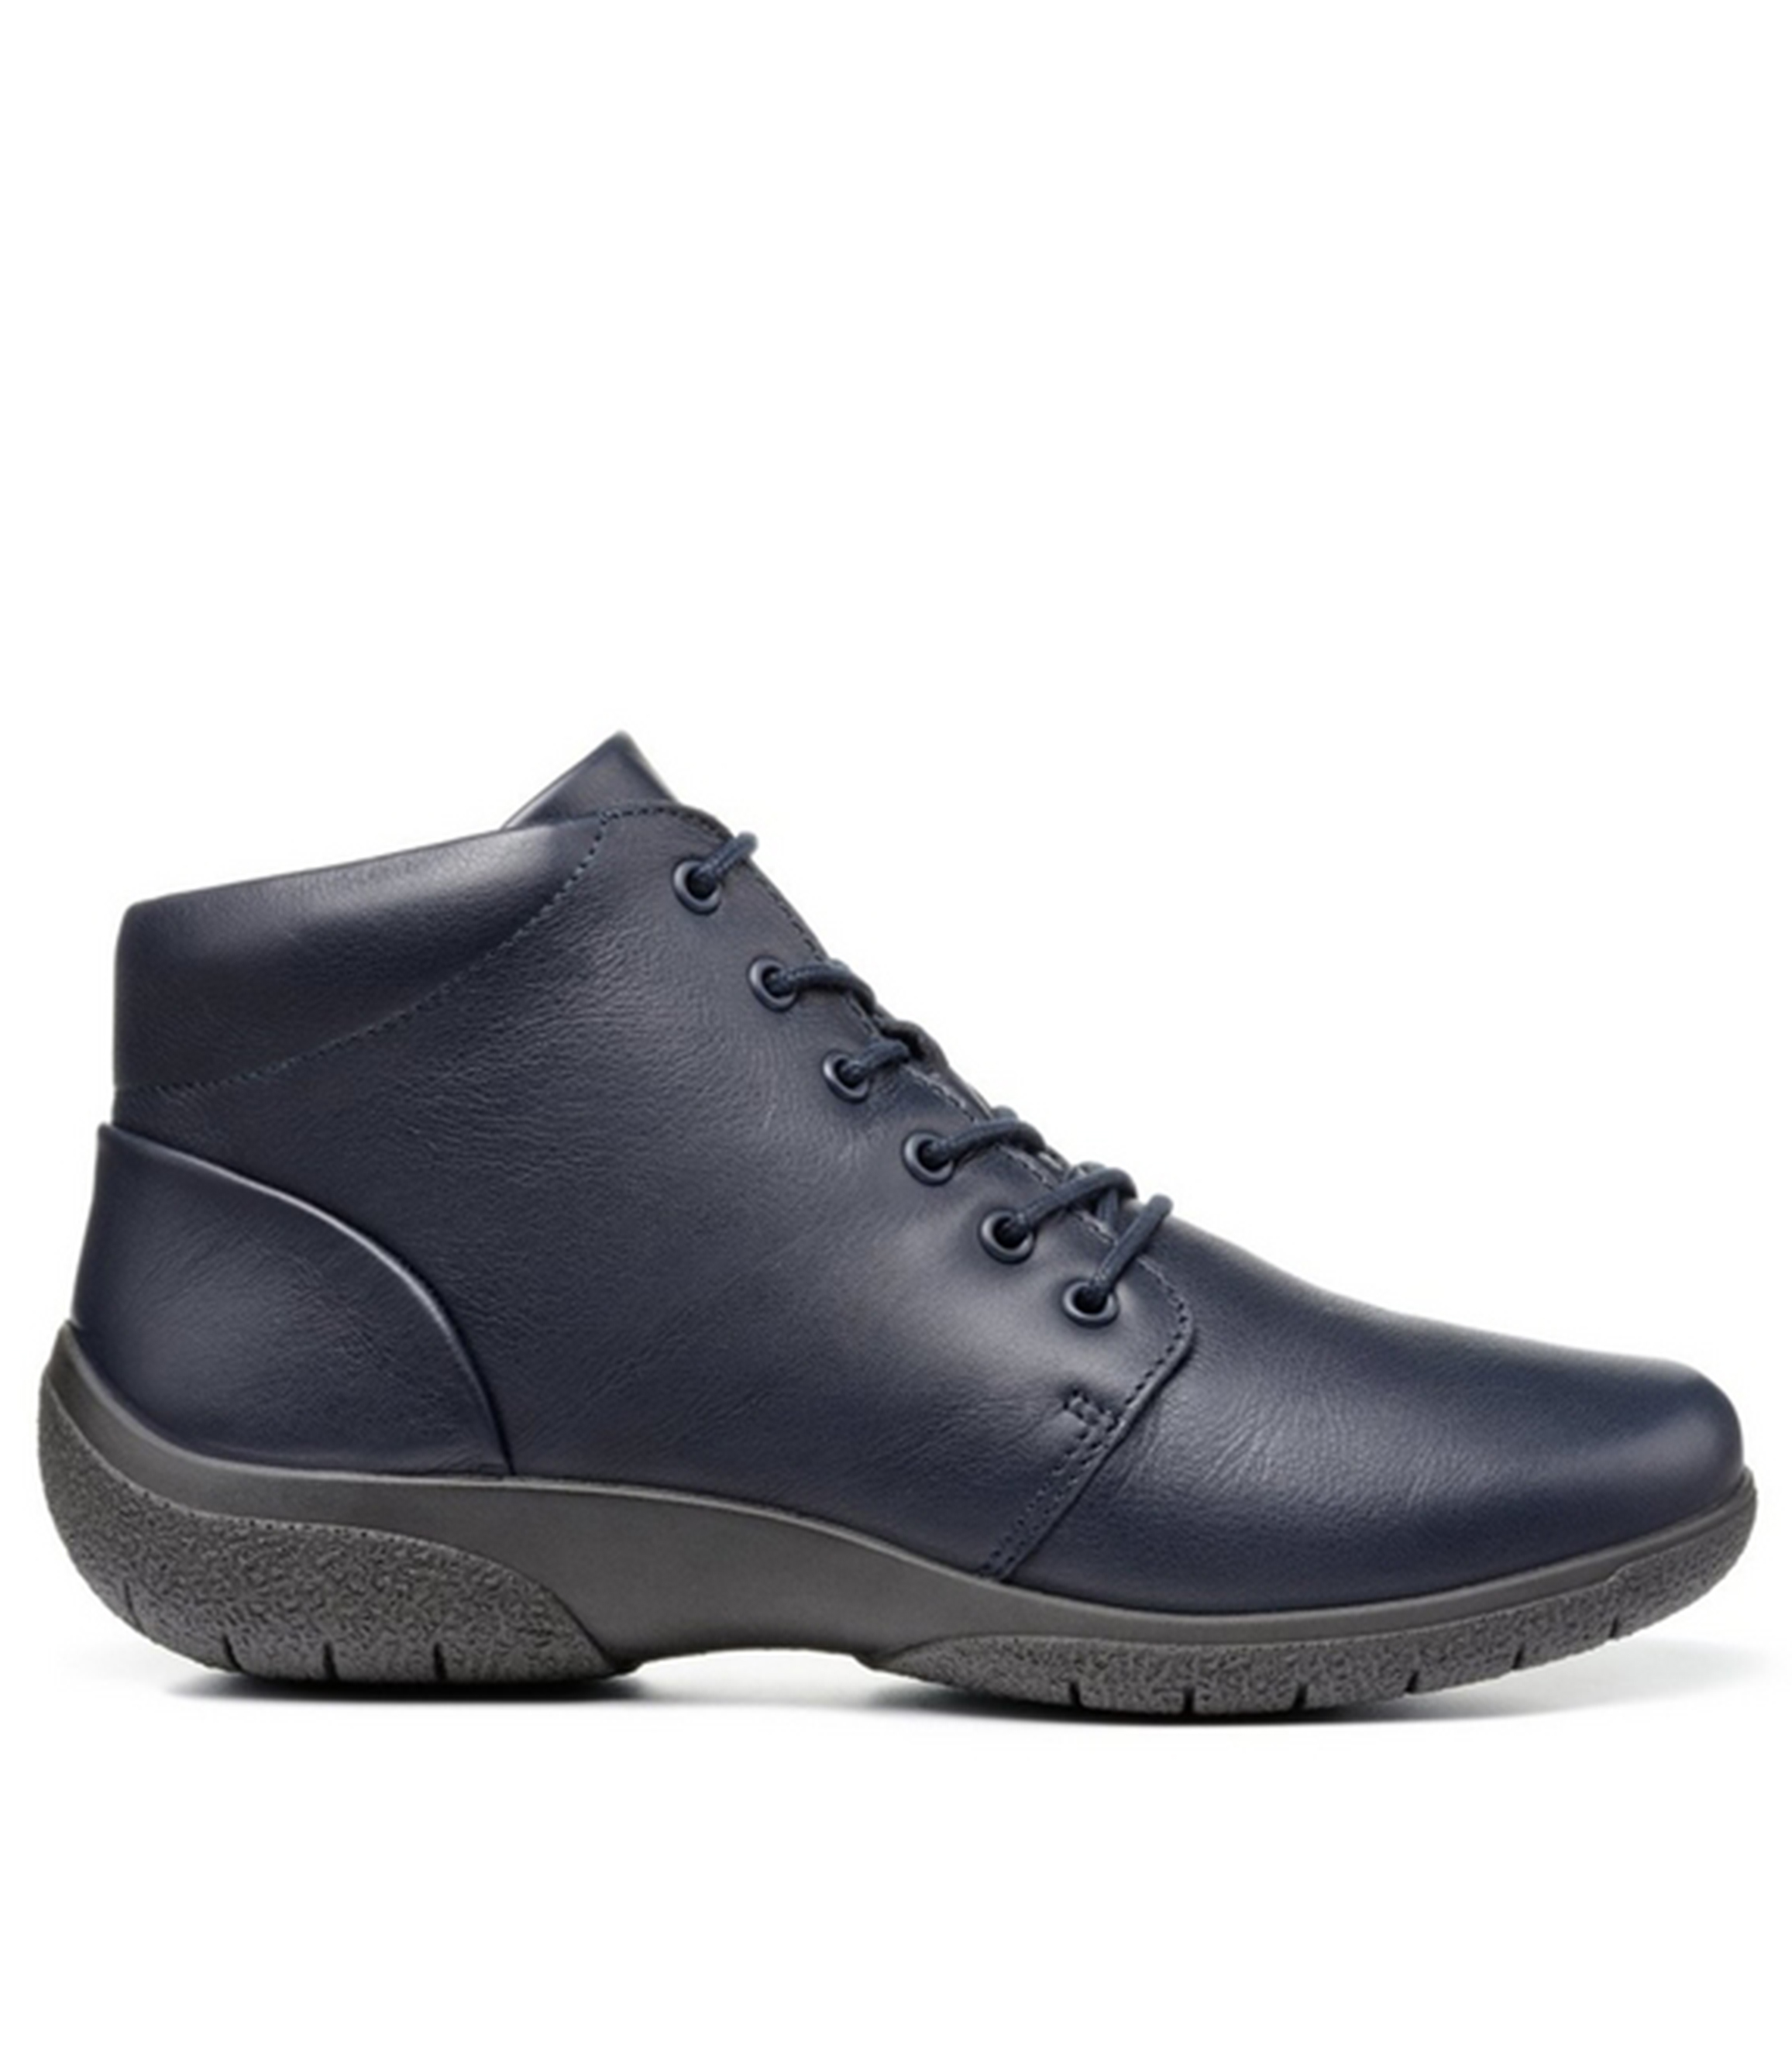 HOTTER NAVY LEATHER ELLERY II LACE-UP BOOTS | Rosella - Style inspired ...